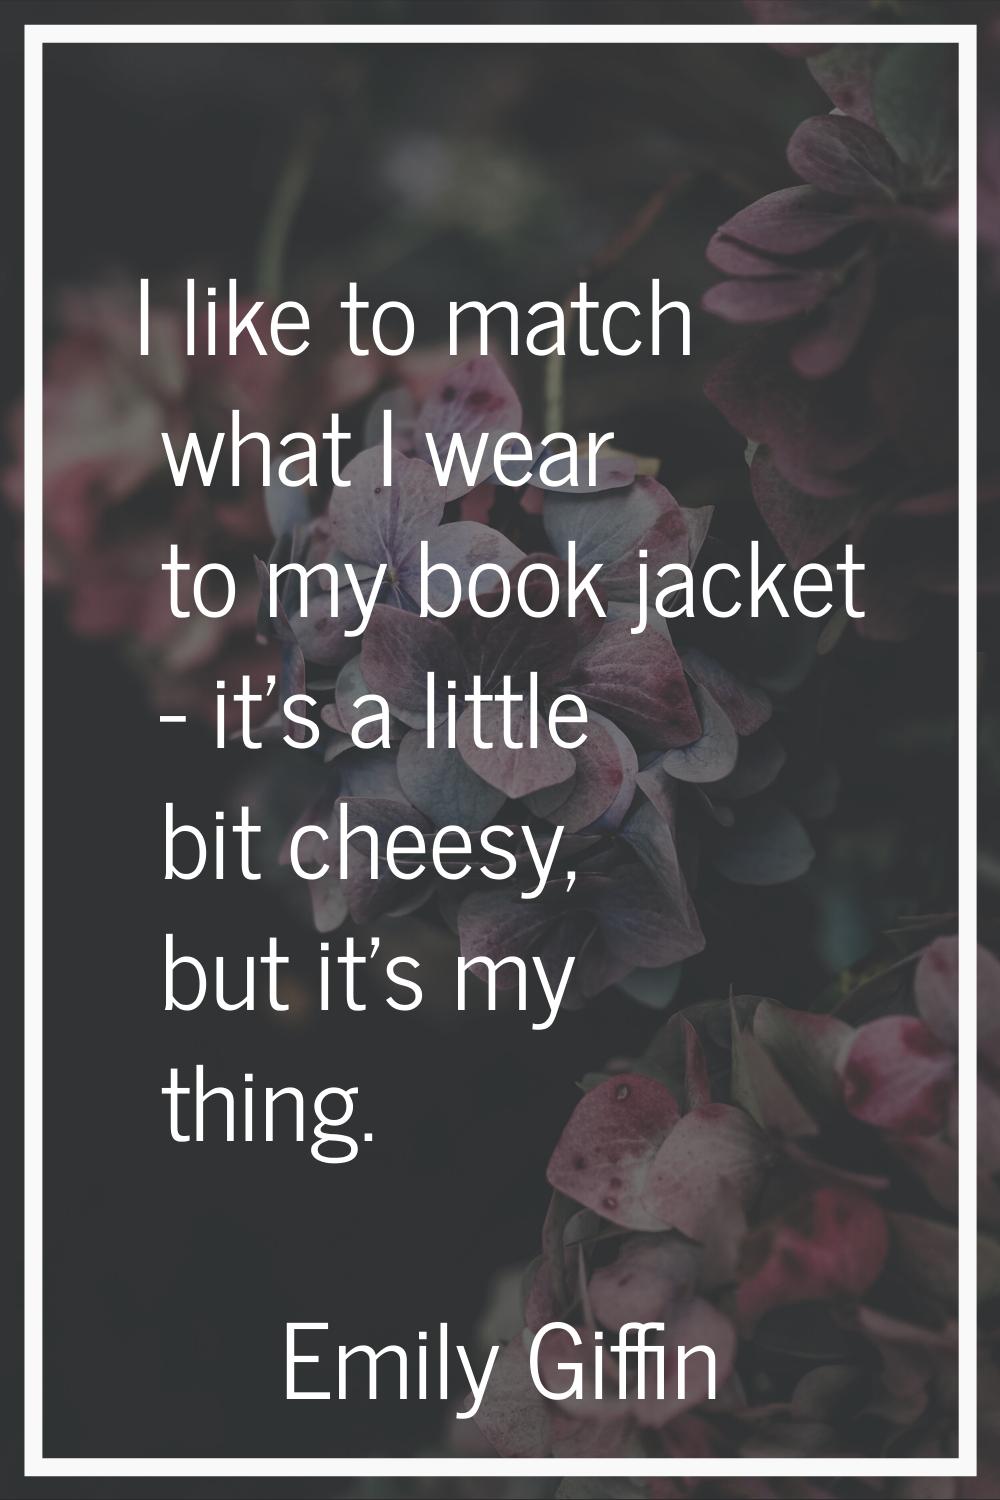 I like to match what I wear to my book jacket - it's a little bit cheesy, but it's my thing.